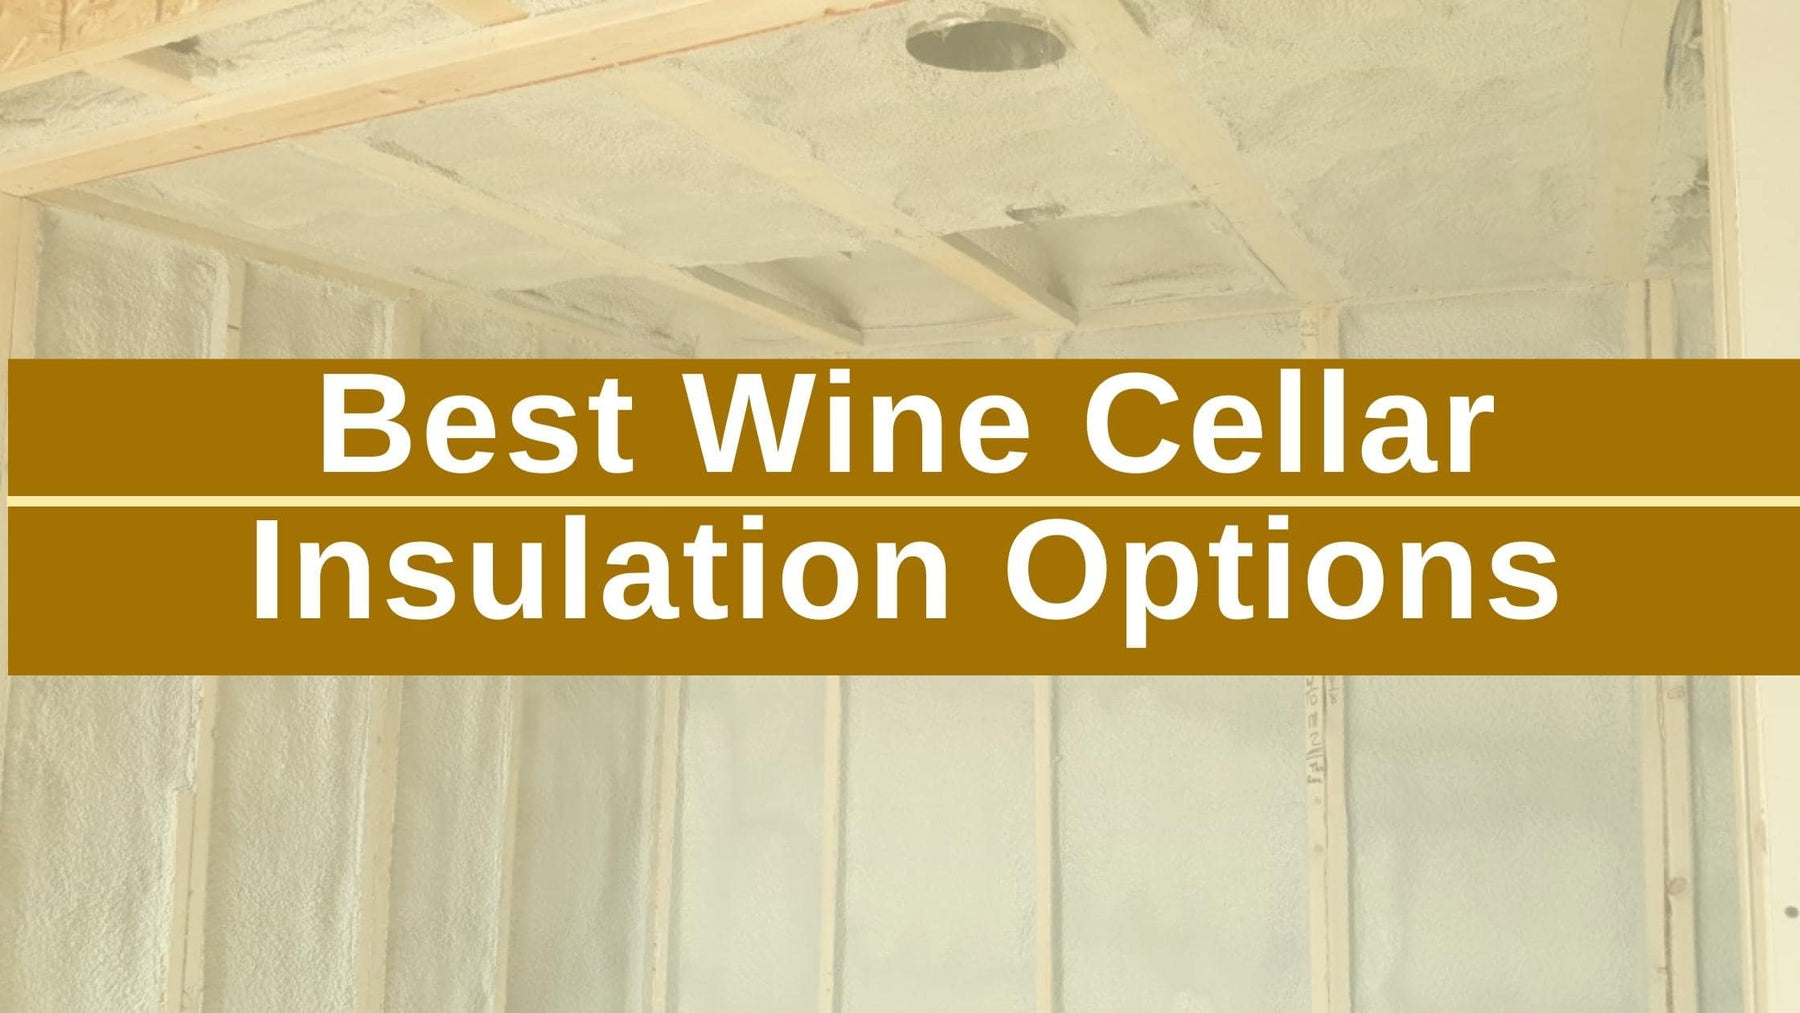 Best Wine Cellar Insulation Options | Wine Coolers Empire - Trusted Dealer